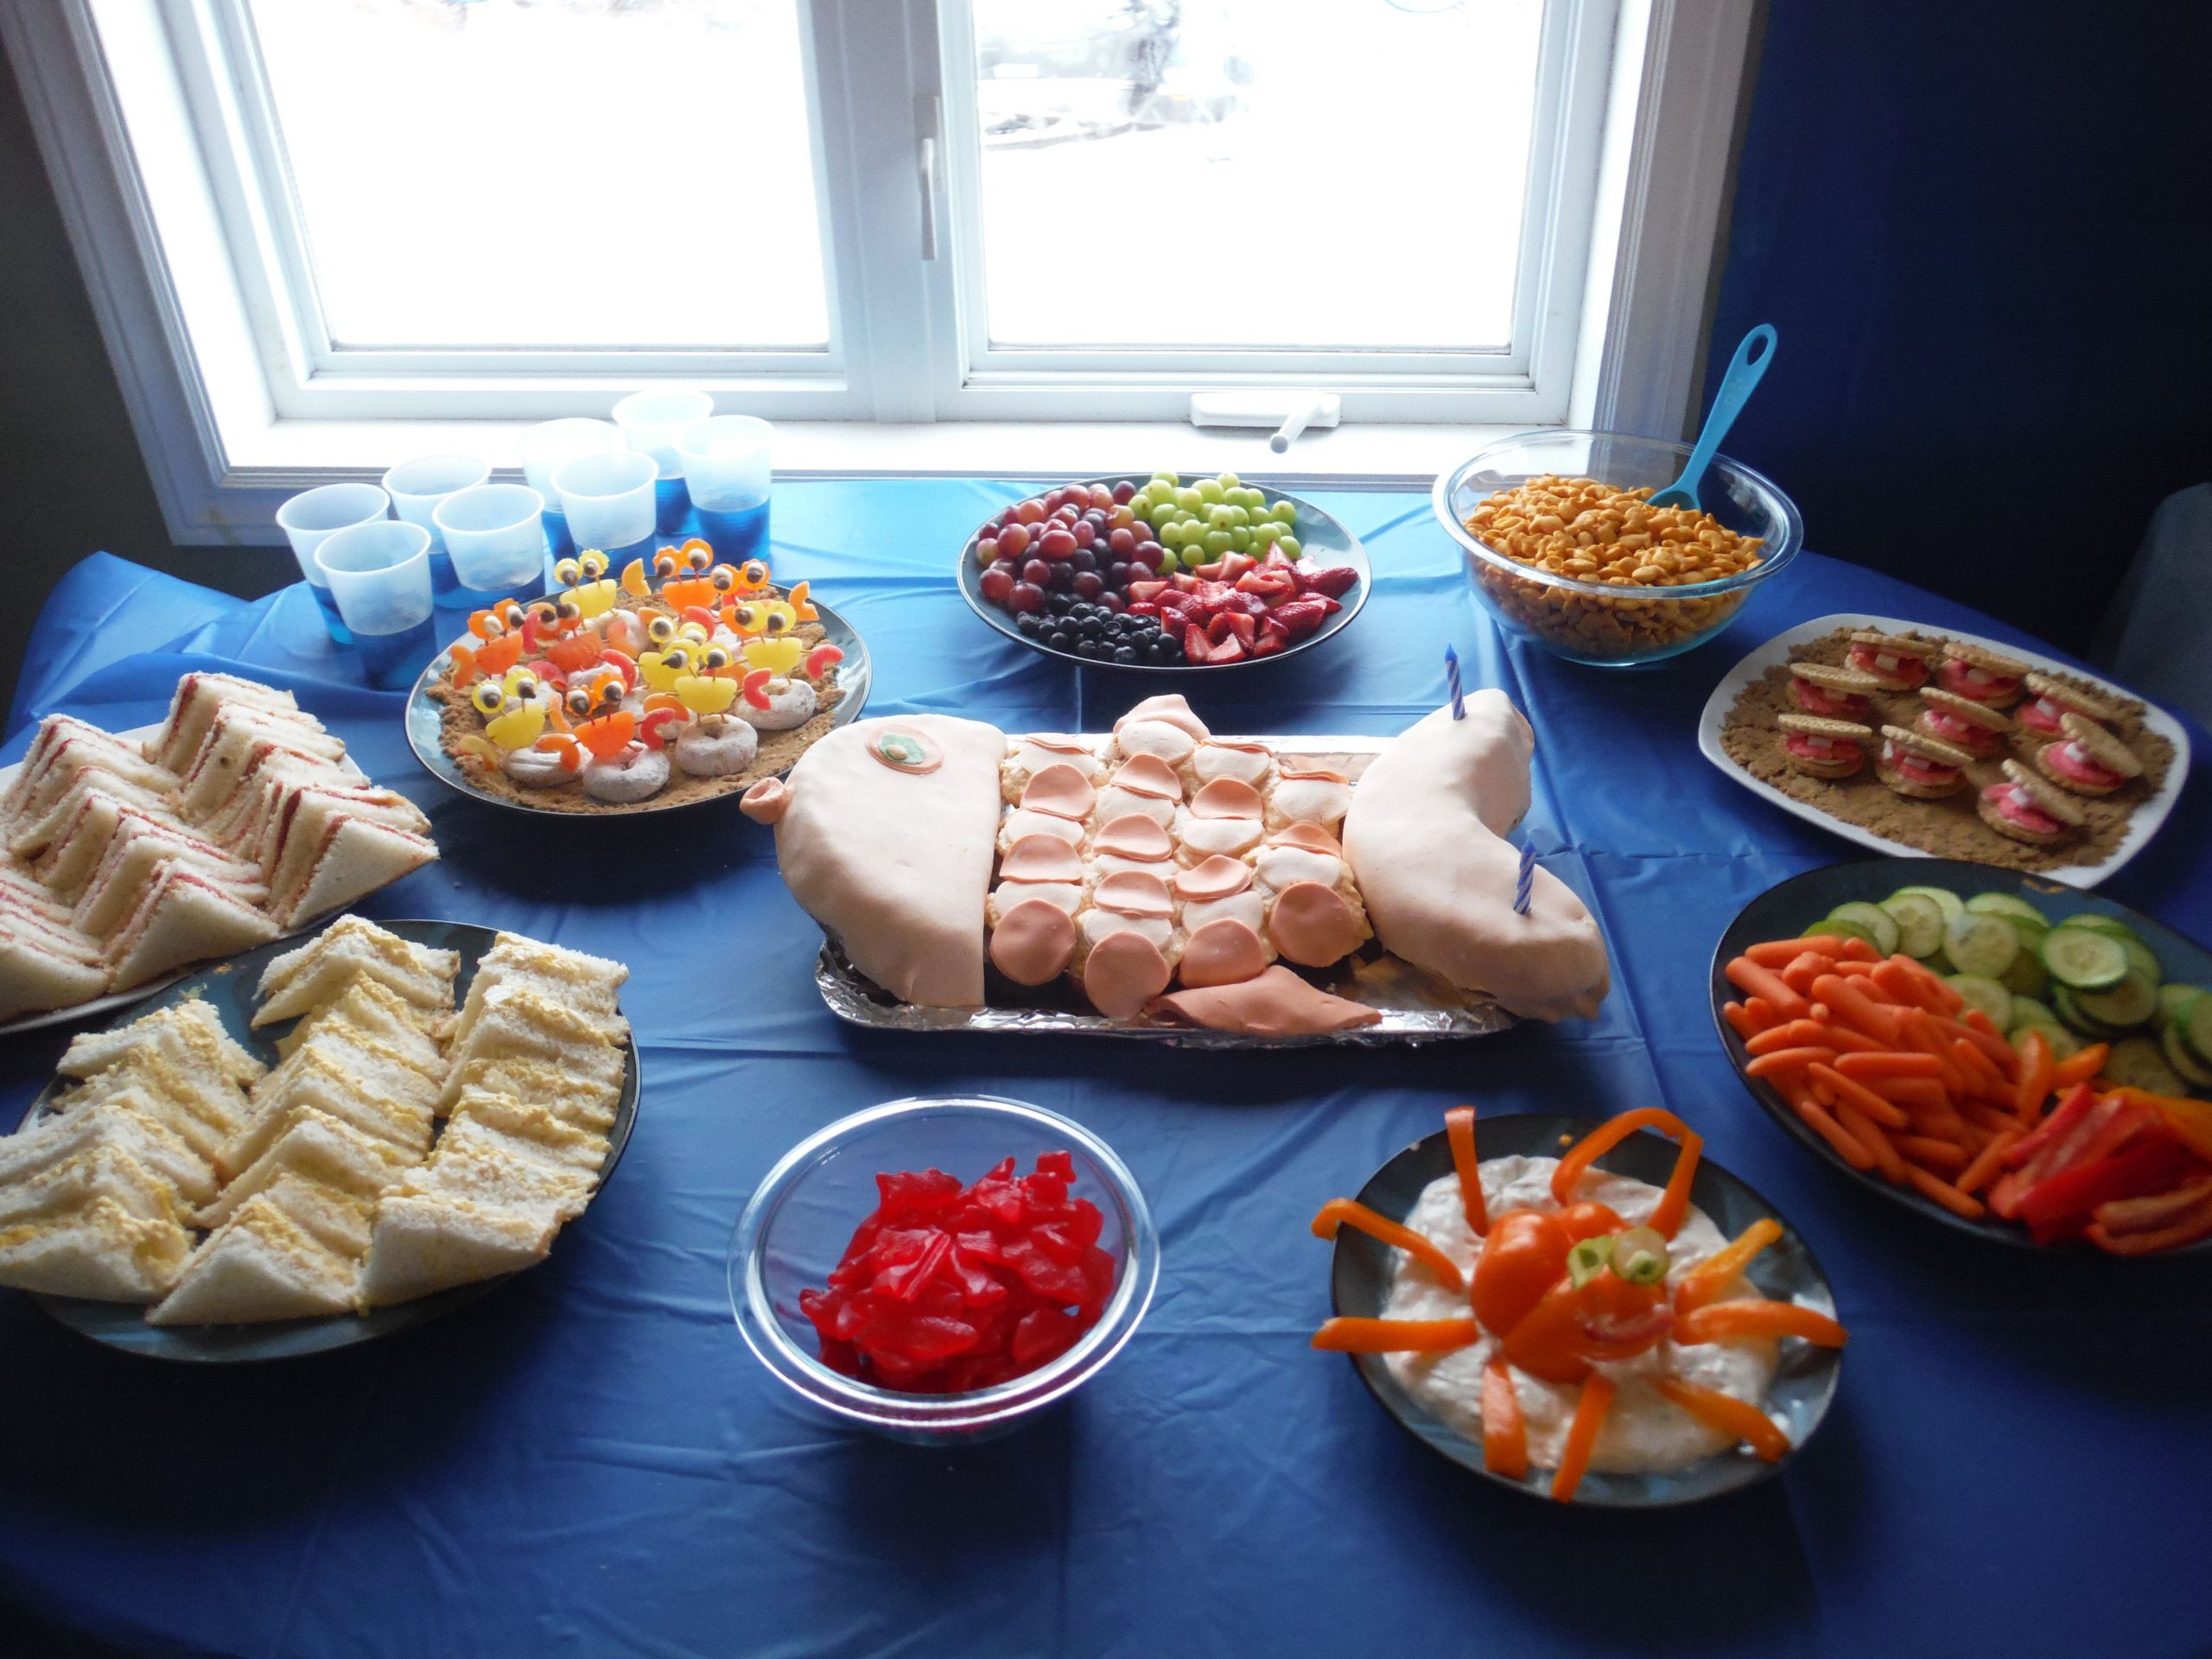 Bubble Guppies Party Food Ideas
 Food for a Bubble Guppies party